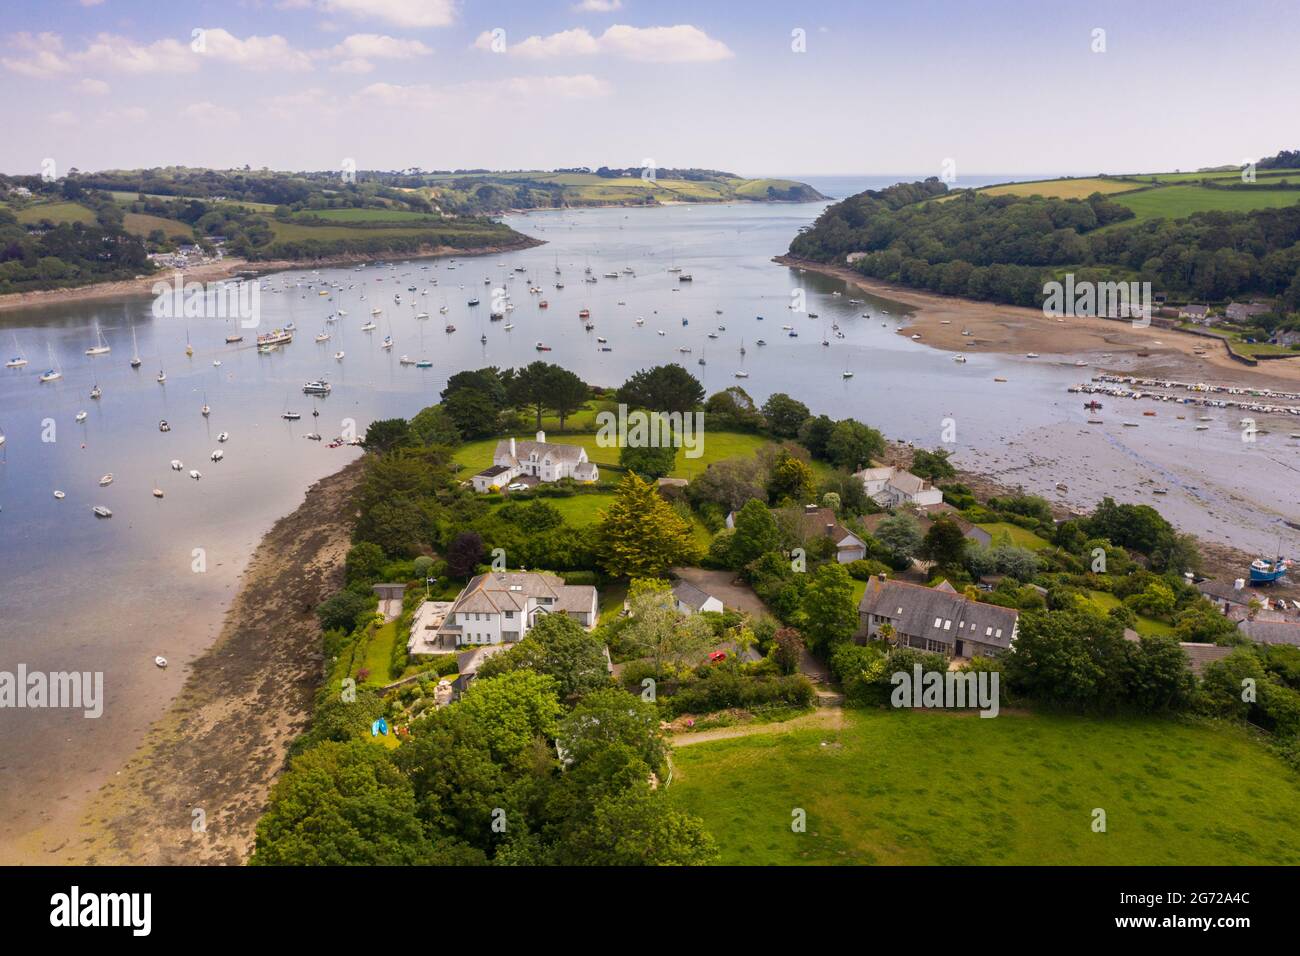 HELFORD, CORNWALL, UK - JUNE 23, 2021.  Aerial landscape of the Helford Passage and estuary in Cornwall, UK Stock Photo